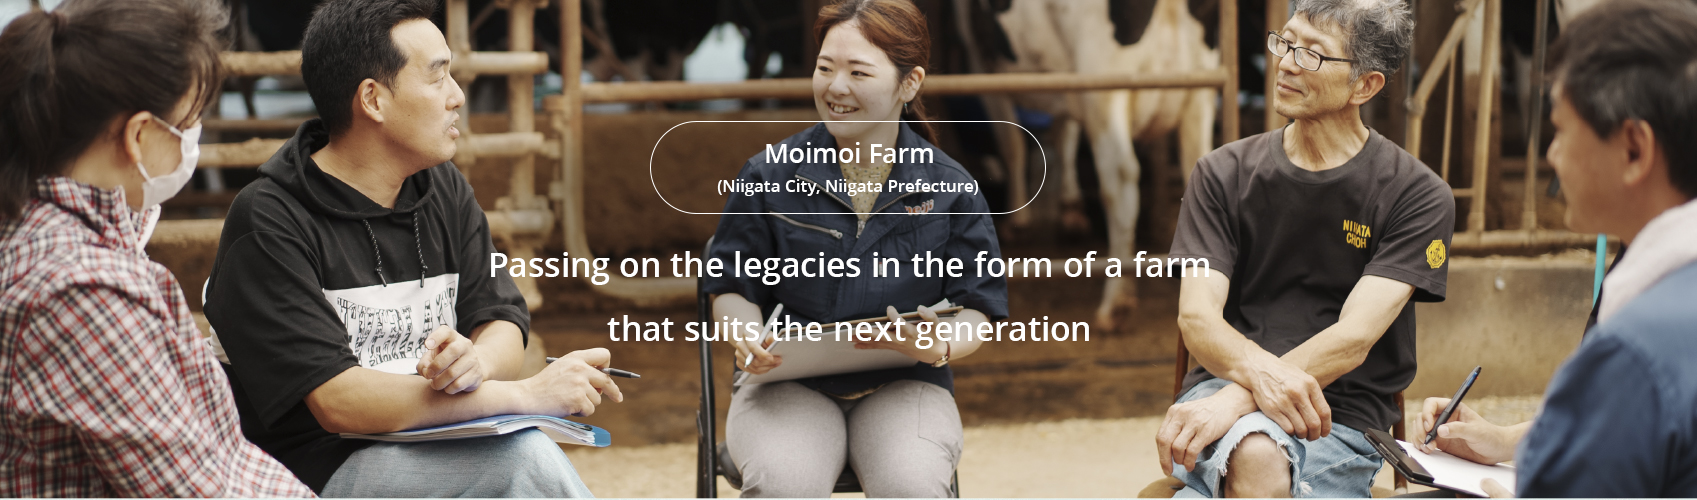 Case5 Moimoi Farm (Niigata City, Niigata Prefecture) Passing on the legacies in the form of a farm that suits the next generation